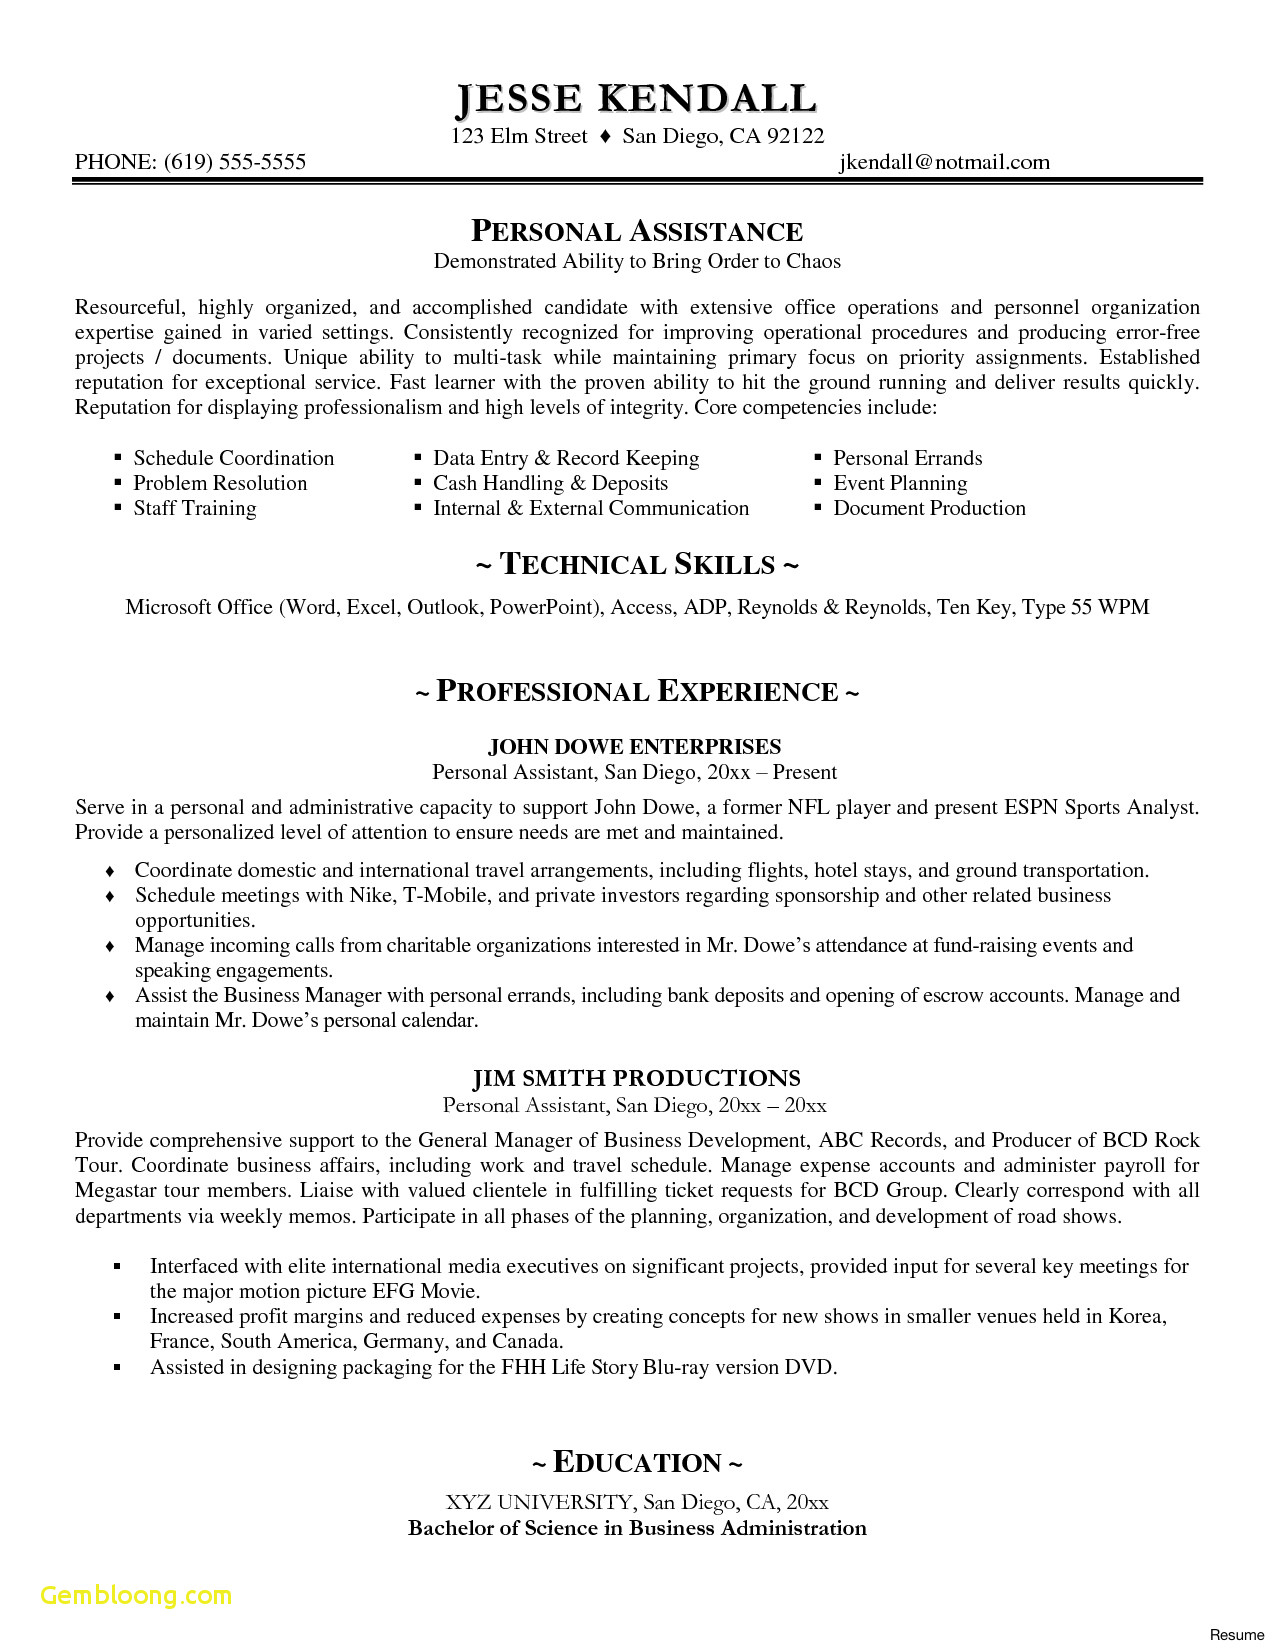 Investor Letter Template - Sample Resume Word Doc New Executive Resume Templates Word Od